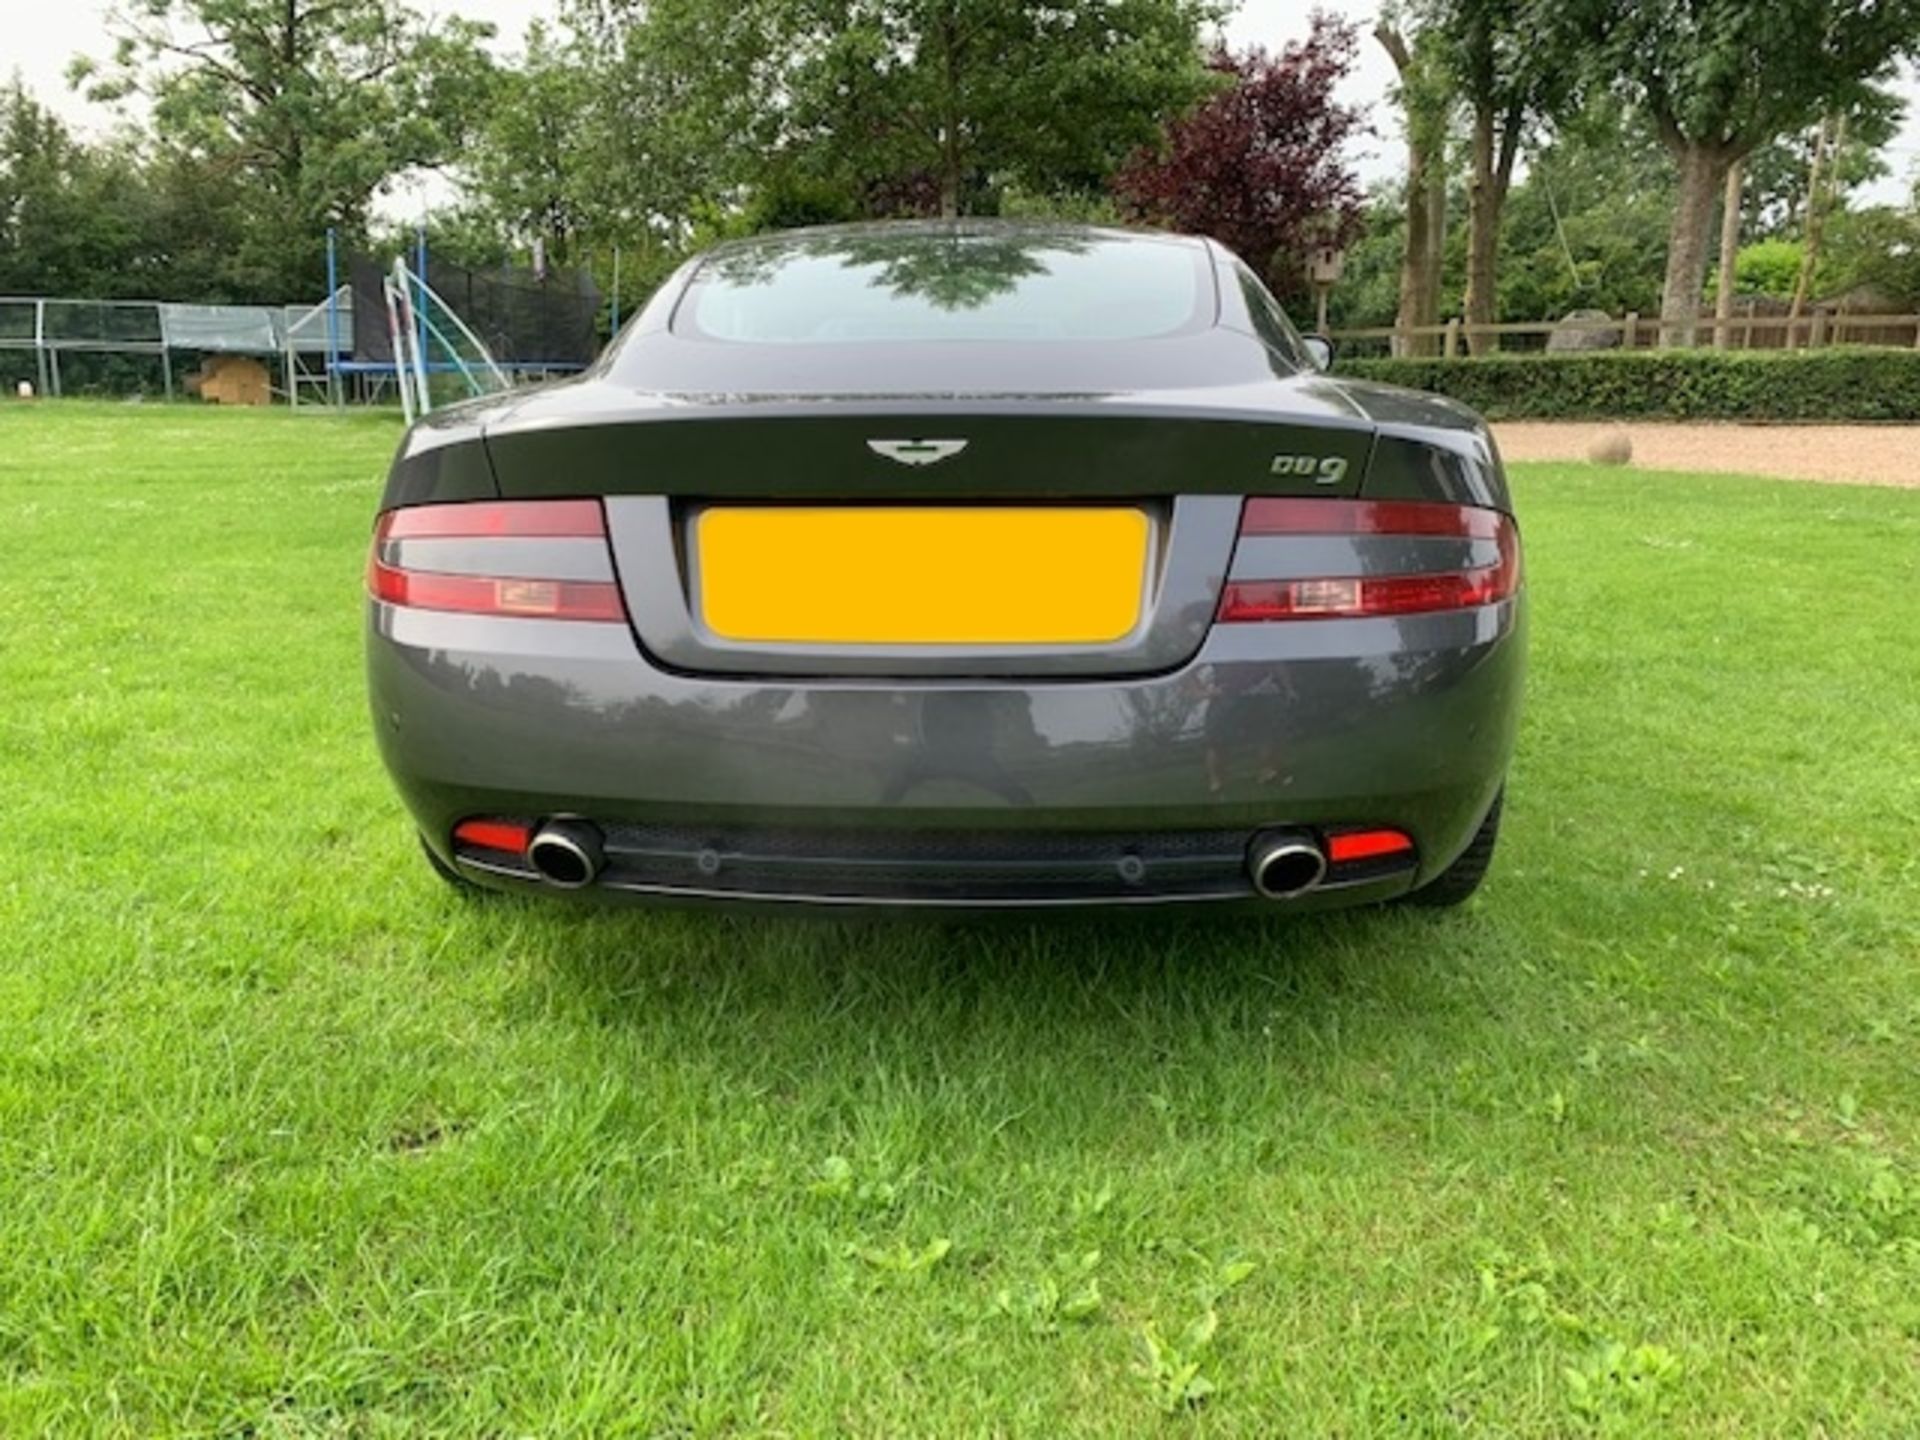 ASTON MARTIN DB9 COUPE V12 2DR TOUCHTRONIC AUTO (5935 cc) - Image 4 of 13